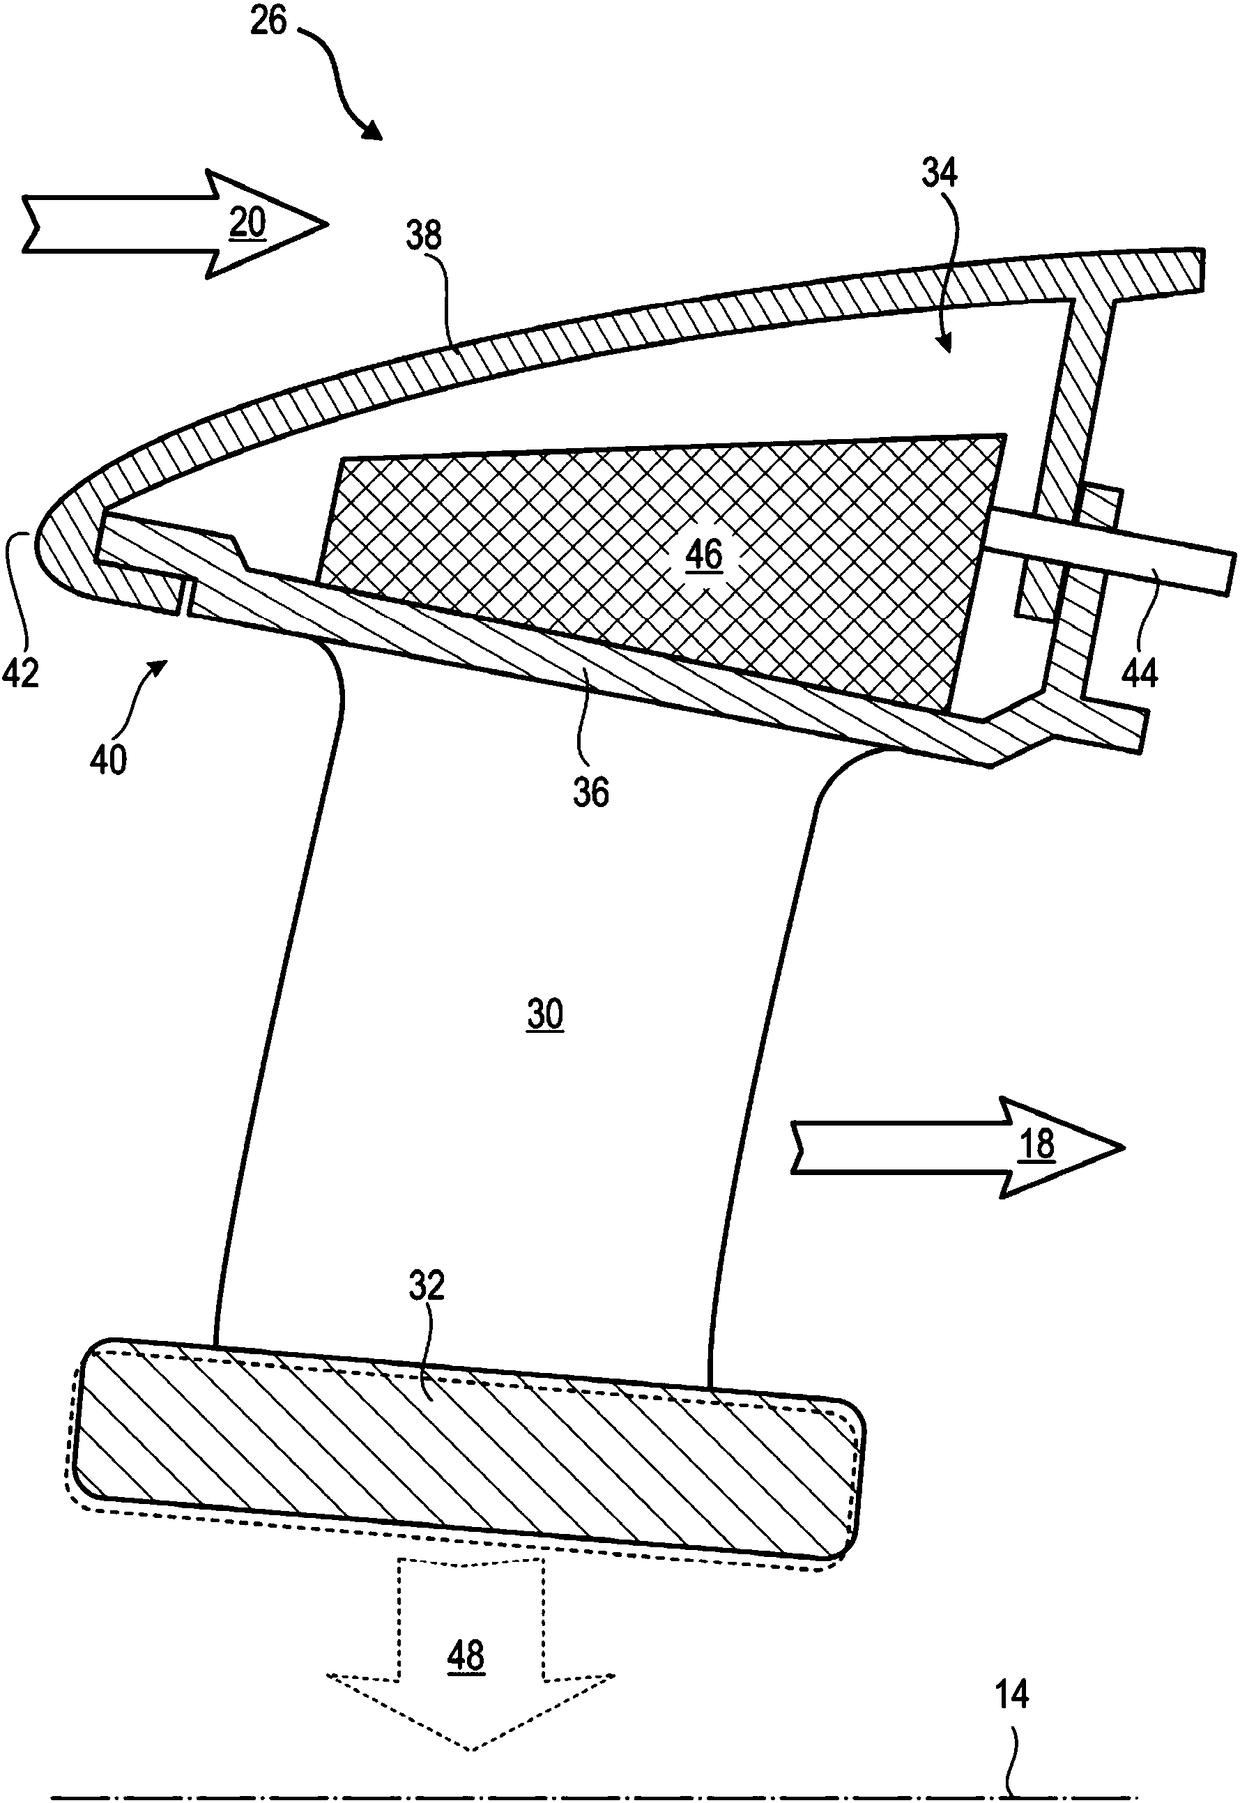 Compressor with segmented inner shroud for an axial turbine engine